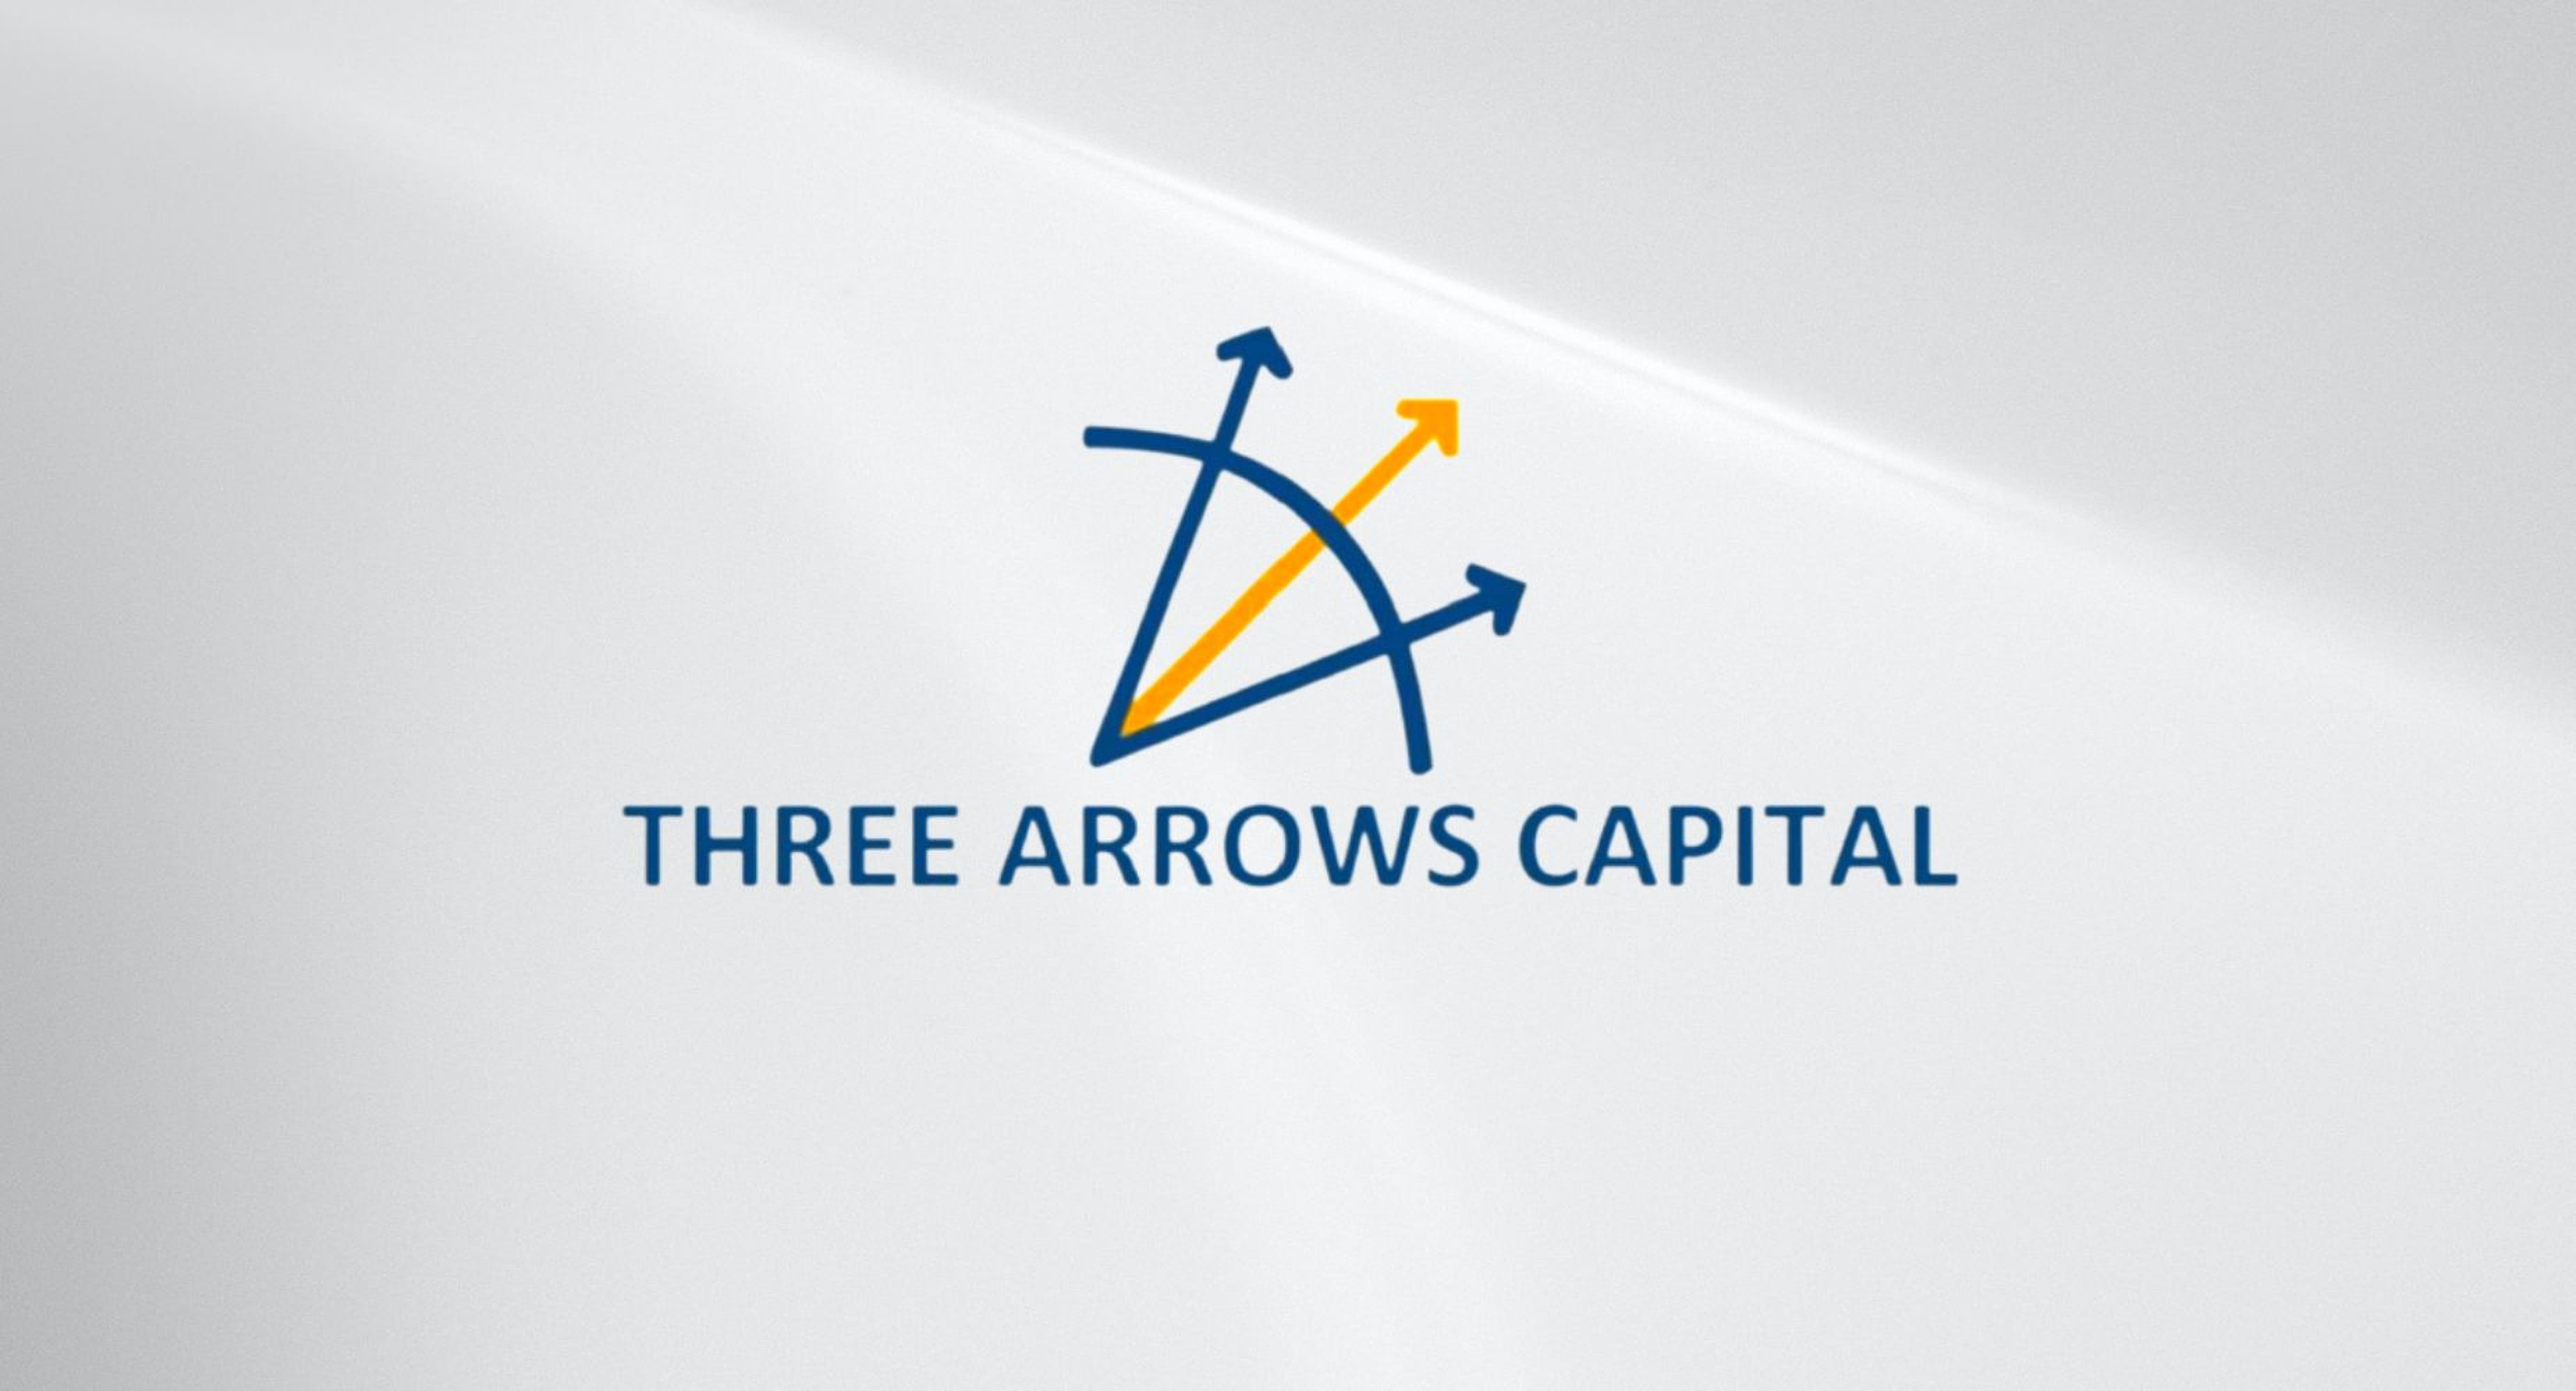 Crypto Hedge Fund Three Arrow Files For Chapter 15 Bankruptcy: Report